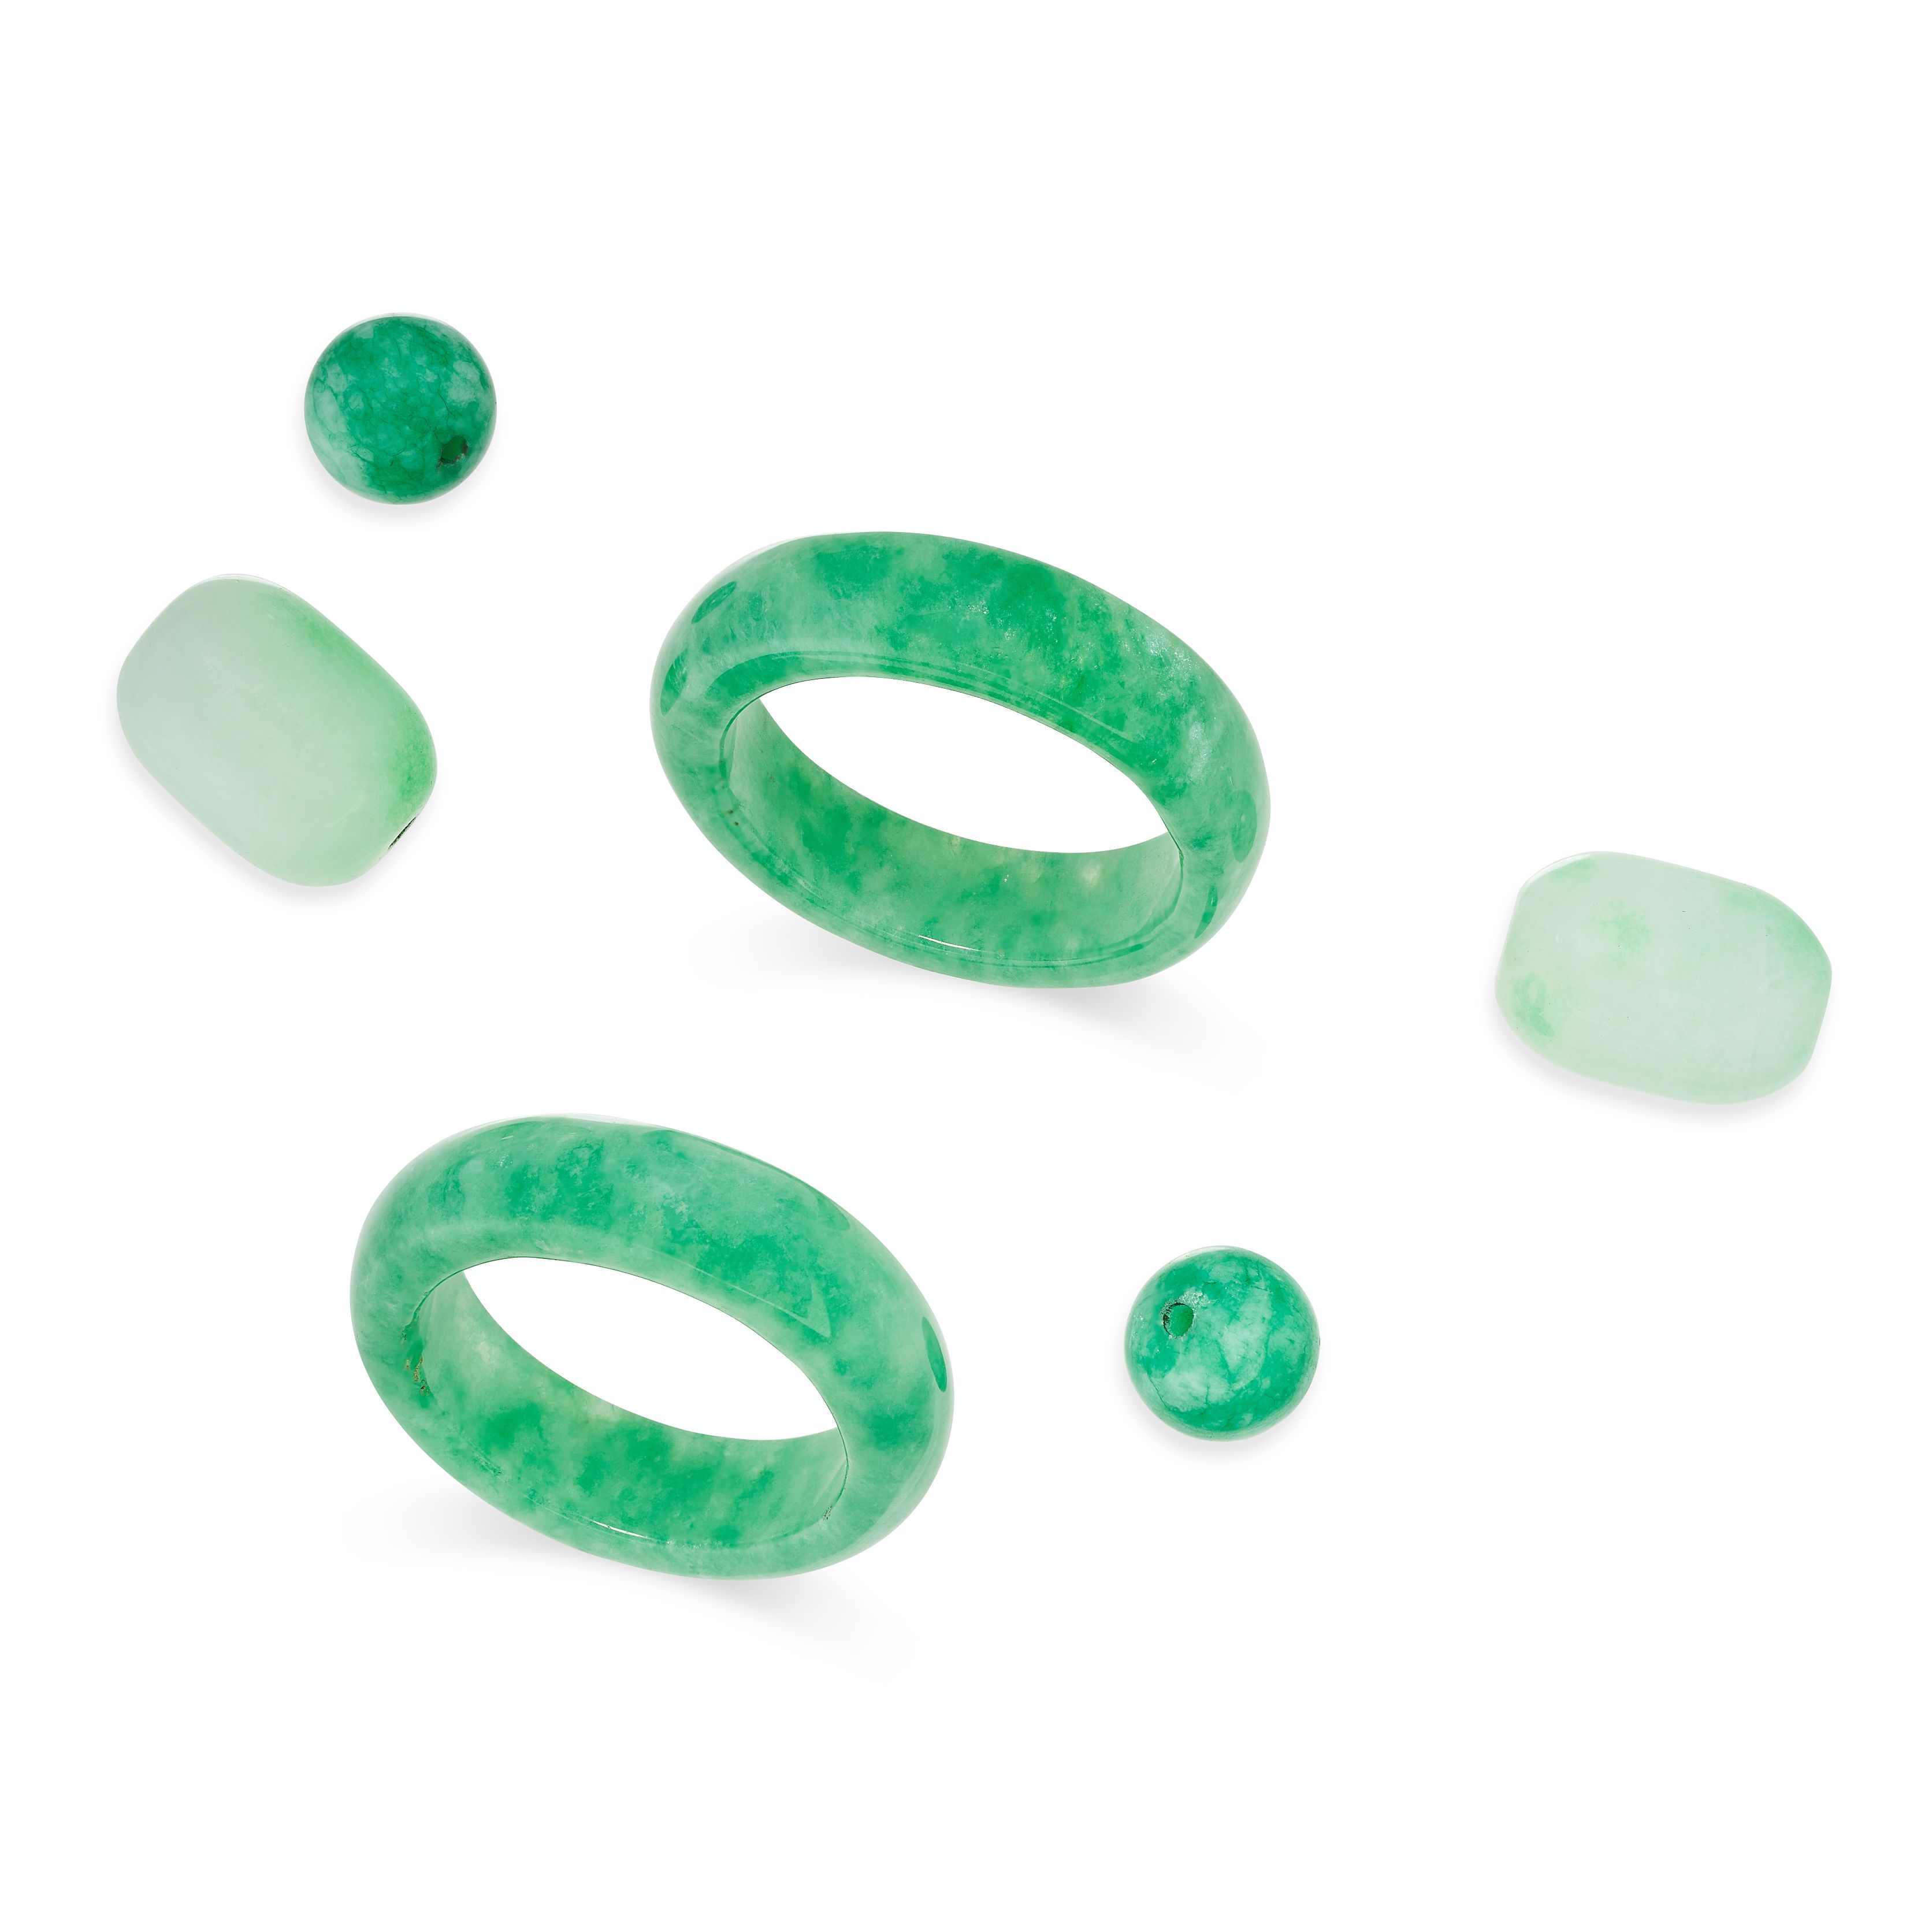 A COLLECTION OF UNMOUNTED JADEITE JADE BEADS comprising four polished beads and two rings, 13.5g